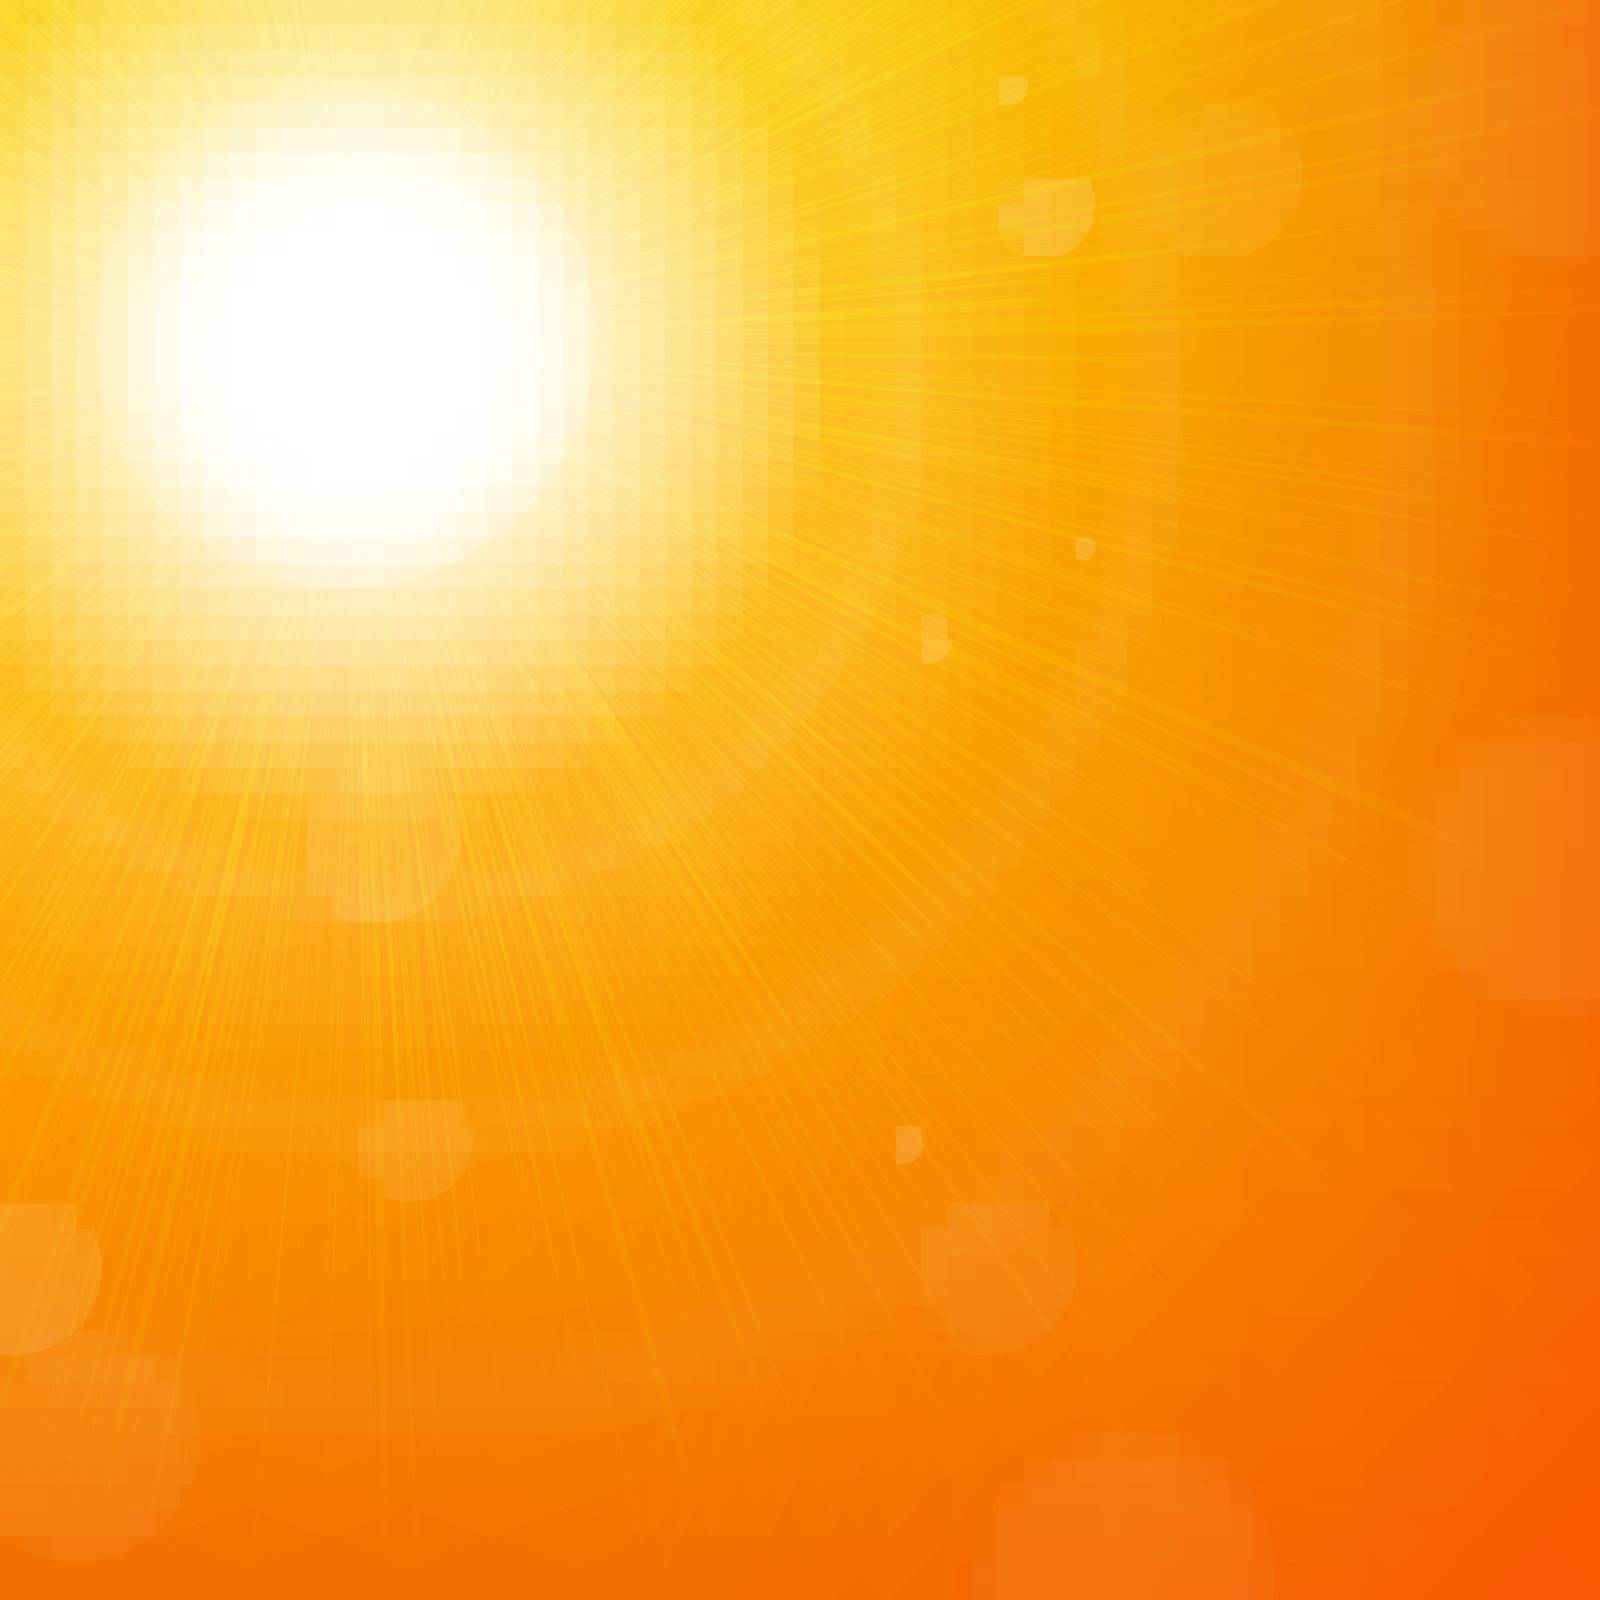 Sun Background, With Gradient Mesh, Vector Illustration